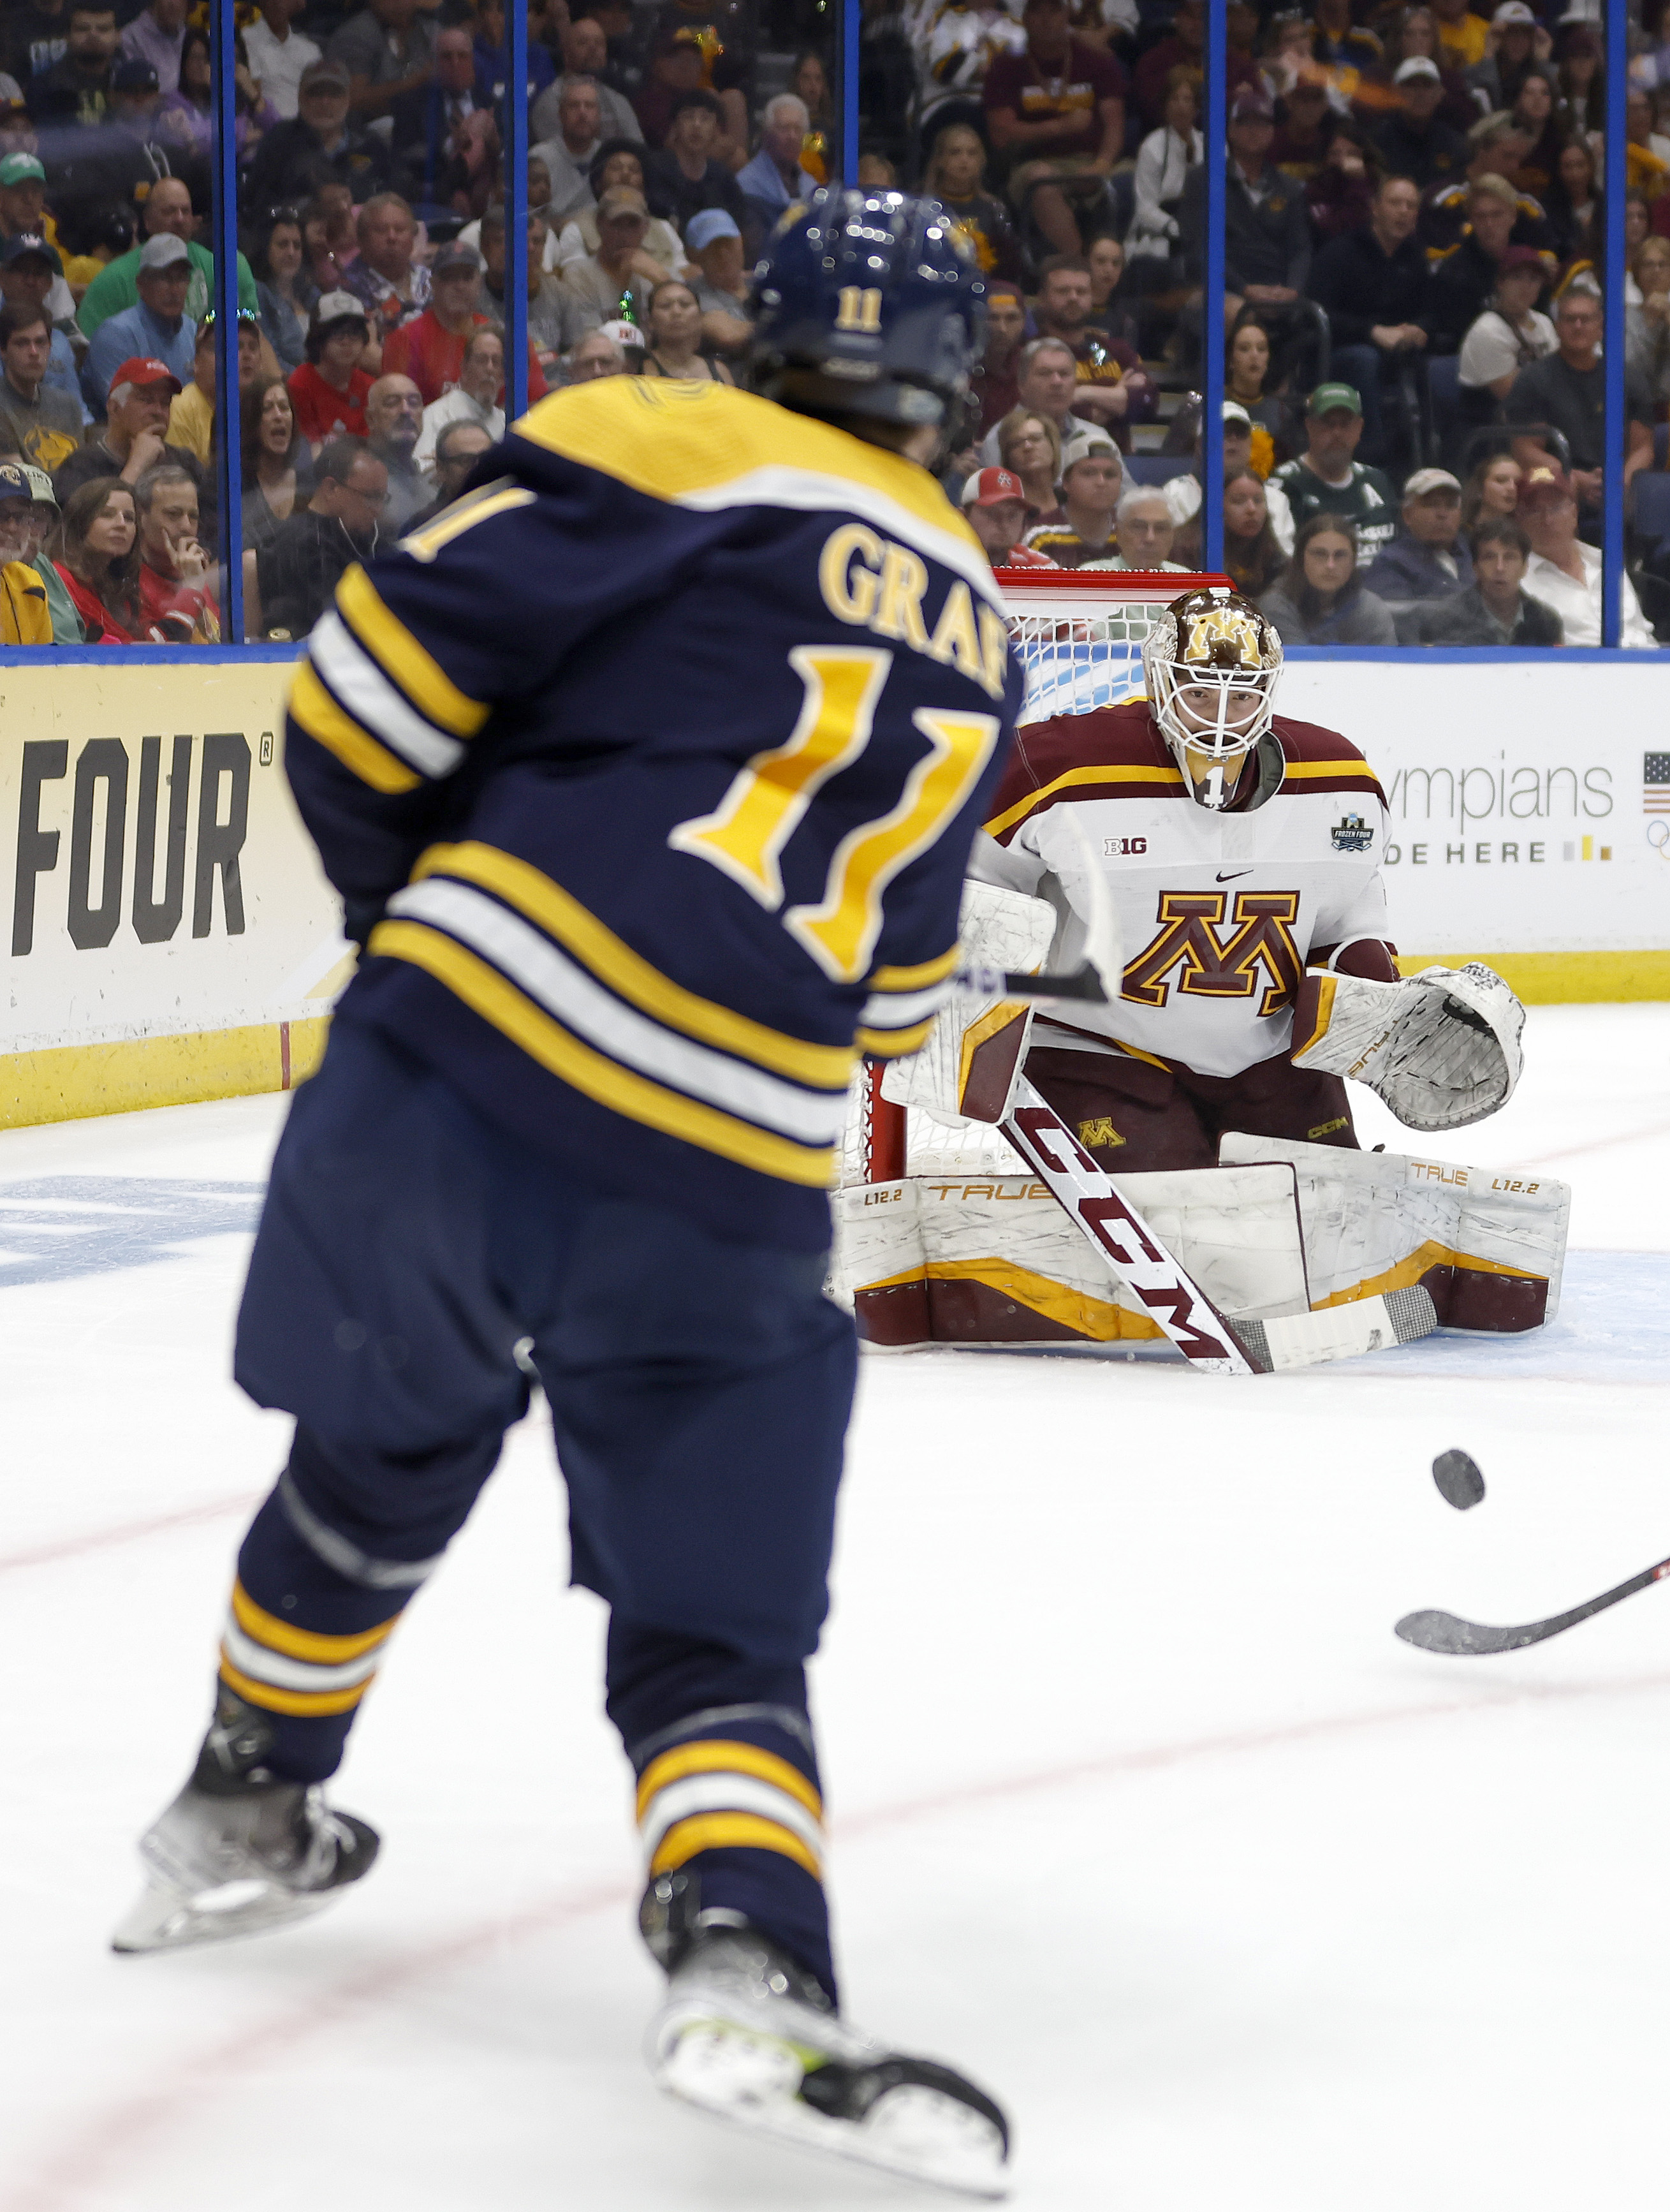 Highlight: Quinnipiac's Collin Graf ties National Championship 2-2 late in the third period